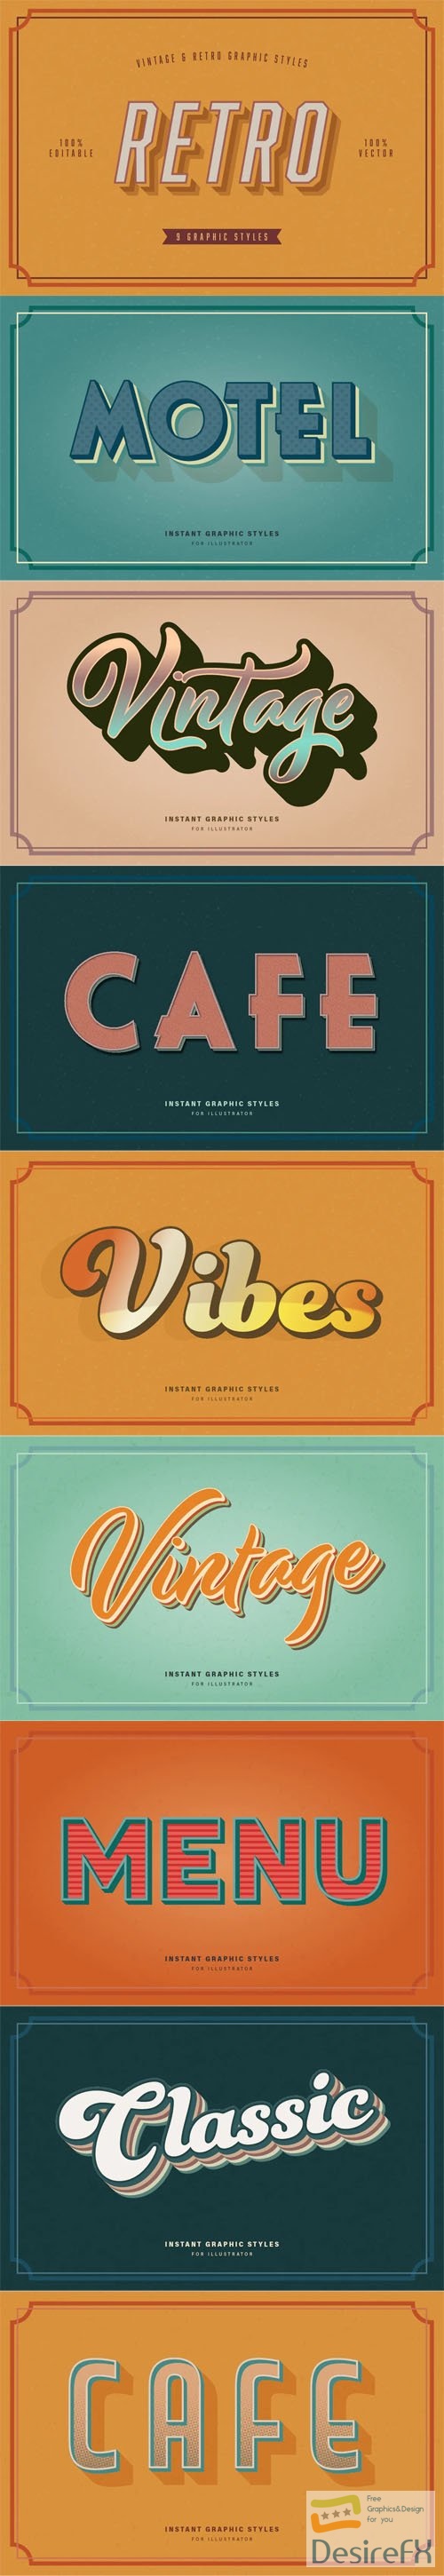 9 Vintage and Retro Graphic Styles for Adobe Illustrator